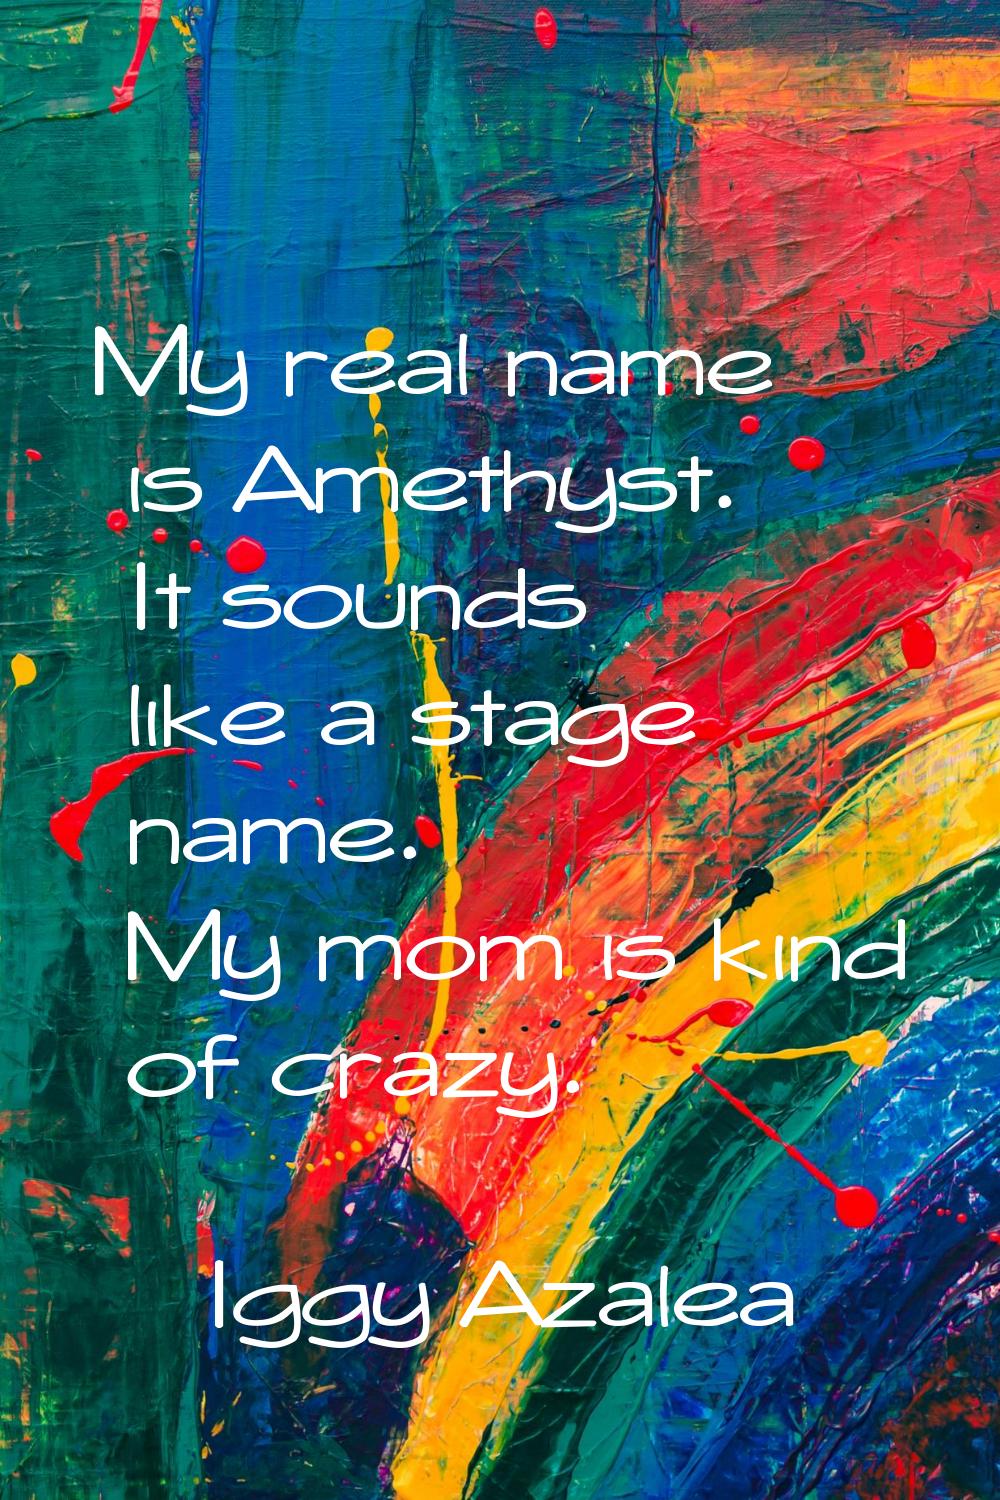 My real name is Amethyst. It sounds like a stage name. My mom is kind of crazy.